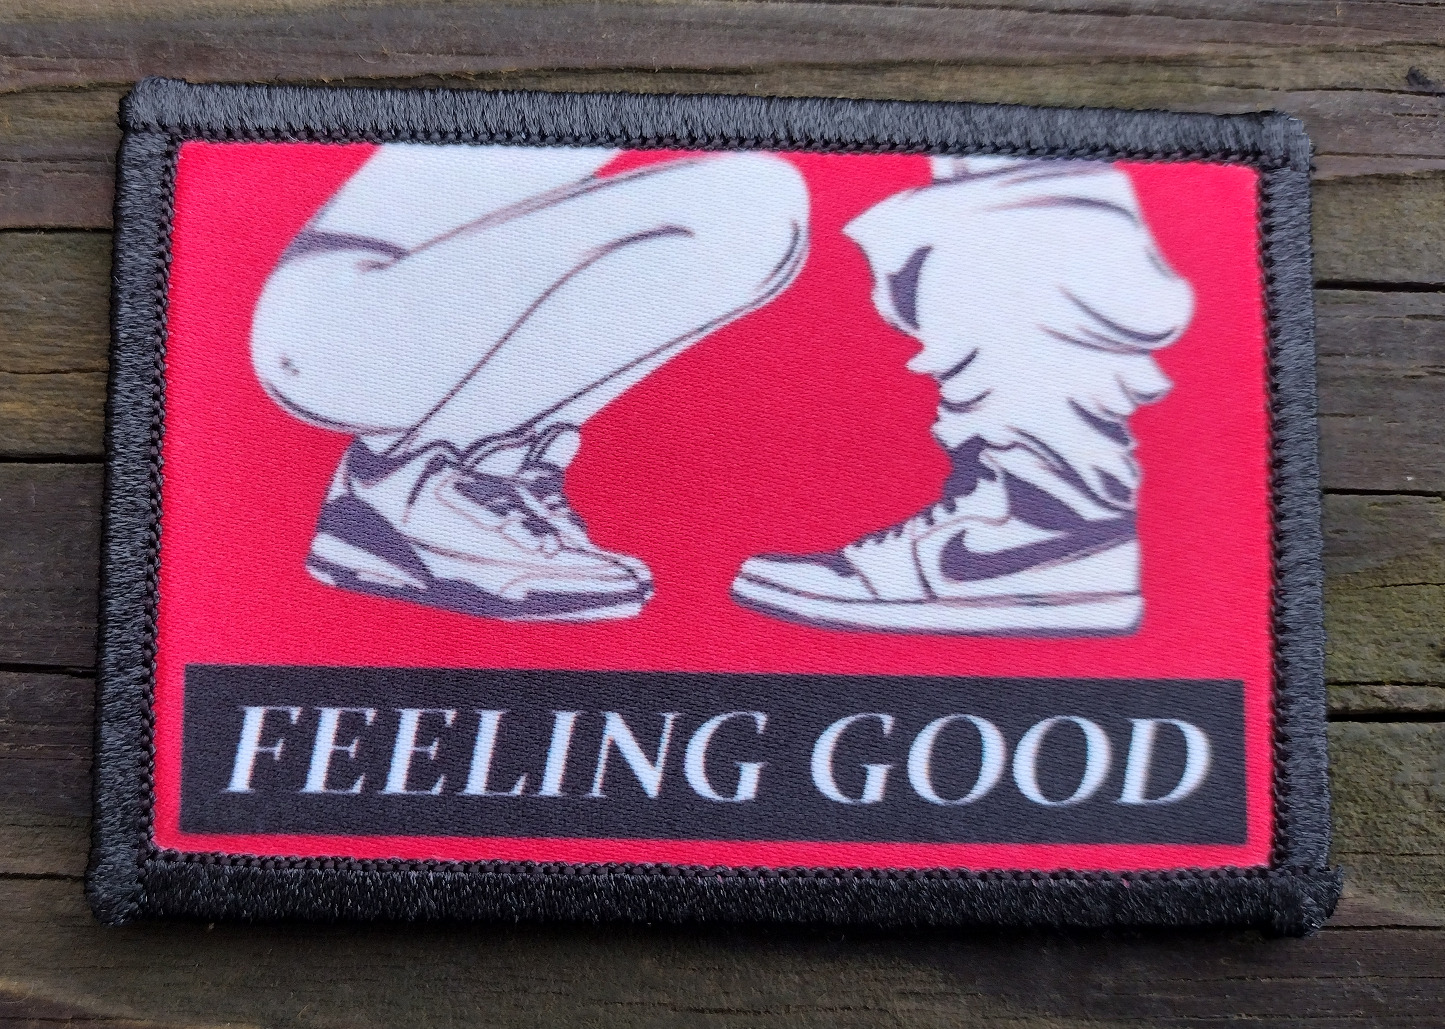 Feeling Good Morale Patch Hook and Loop Army Custom Tactical Funny 2A Gear